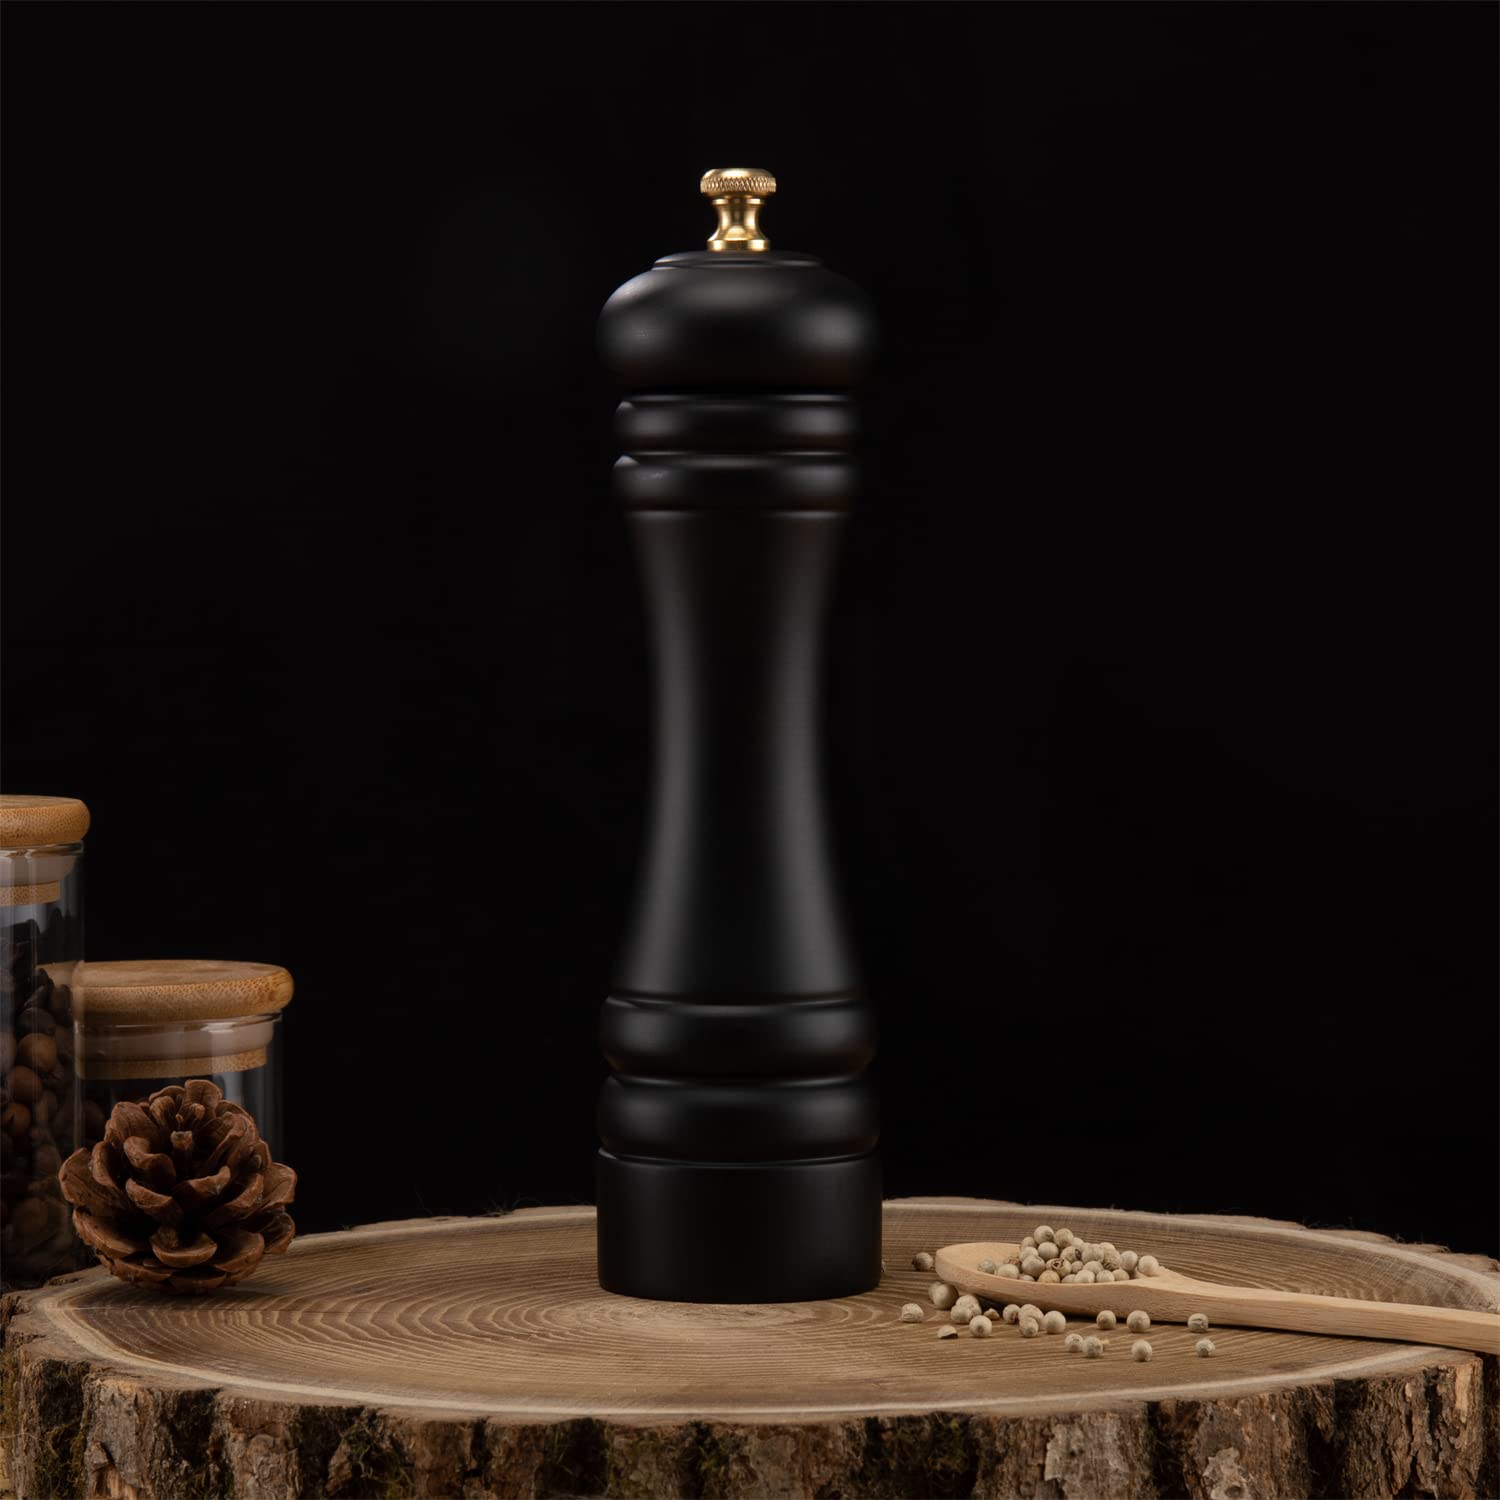 Black Pepper Mill Grinder Classic Pepper Grinder with Adjustable Stainless Steel Precision Mechanism Suitable for Home, Kitchen, Barbecue, Party (Black+ Gold, 12 In)